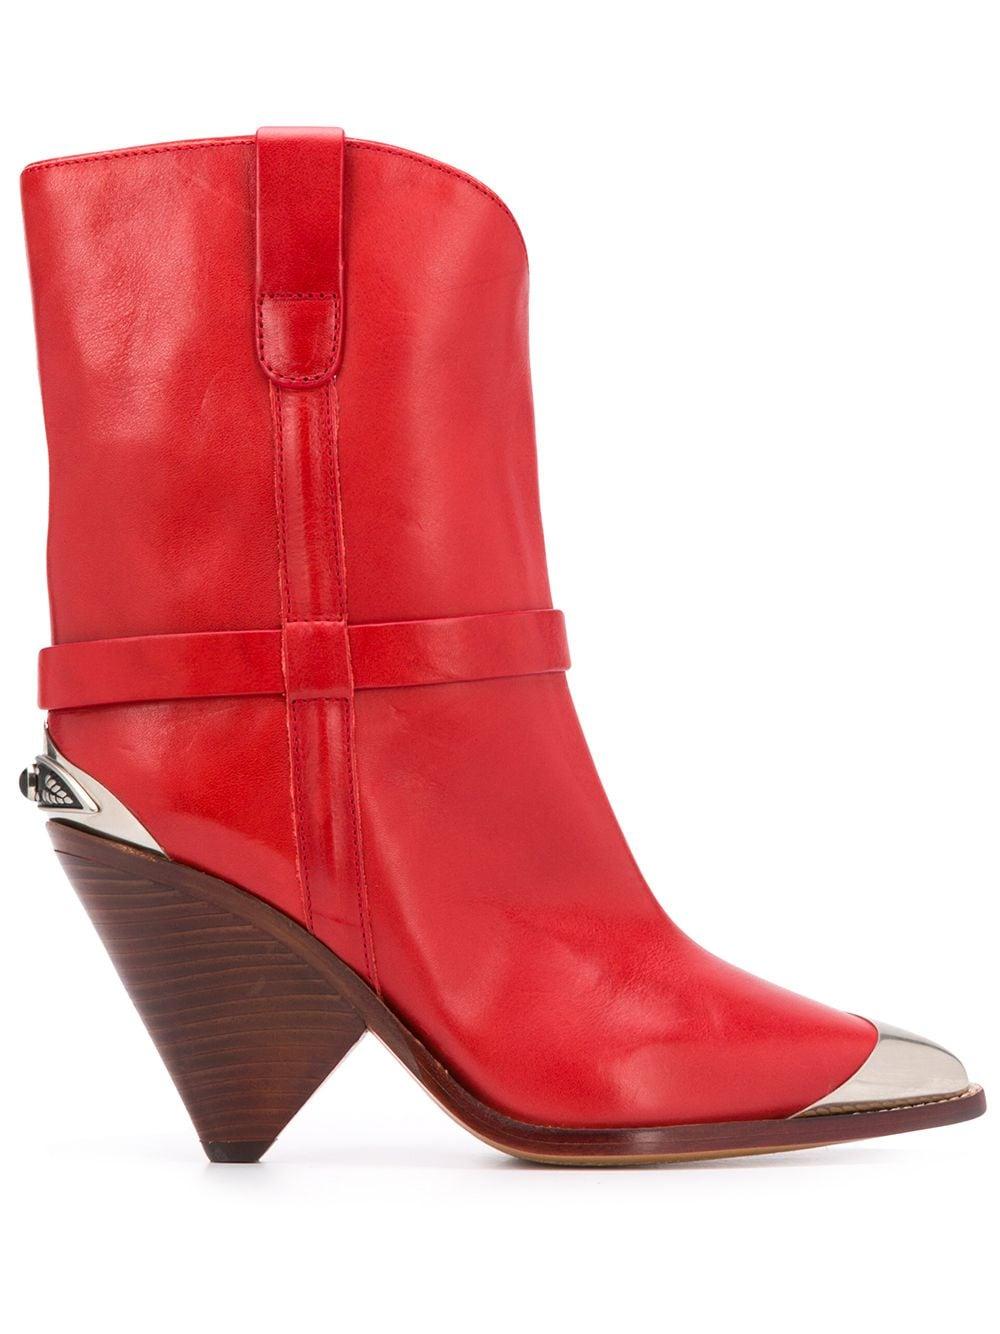 Isabel Marant Boots in Red - Lyst